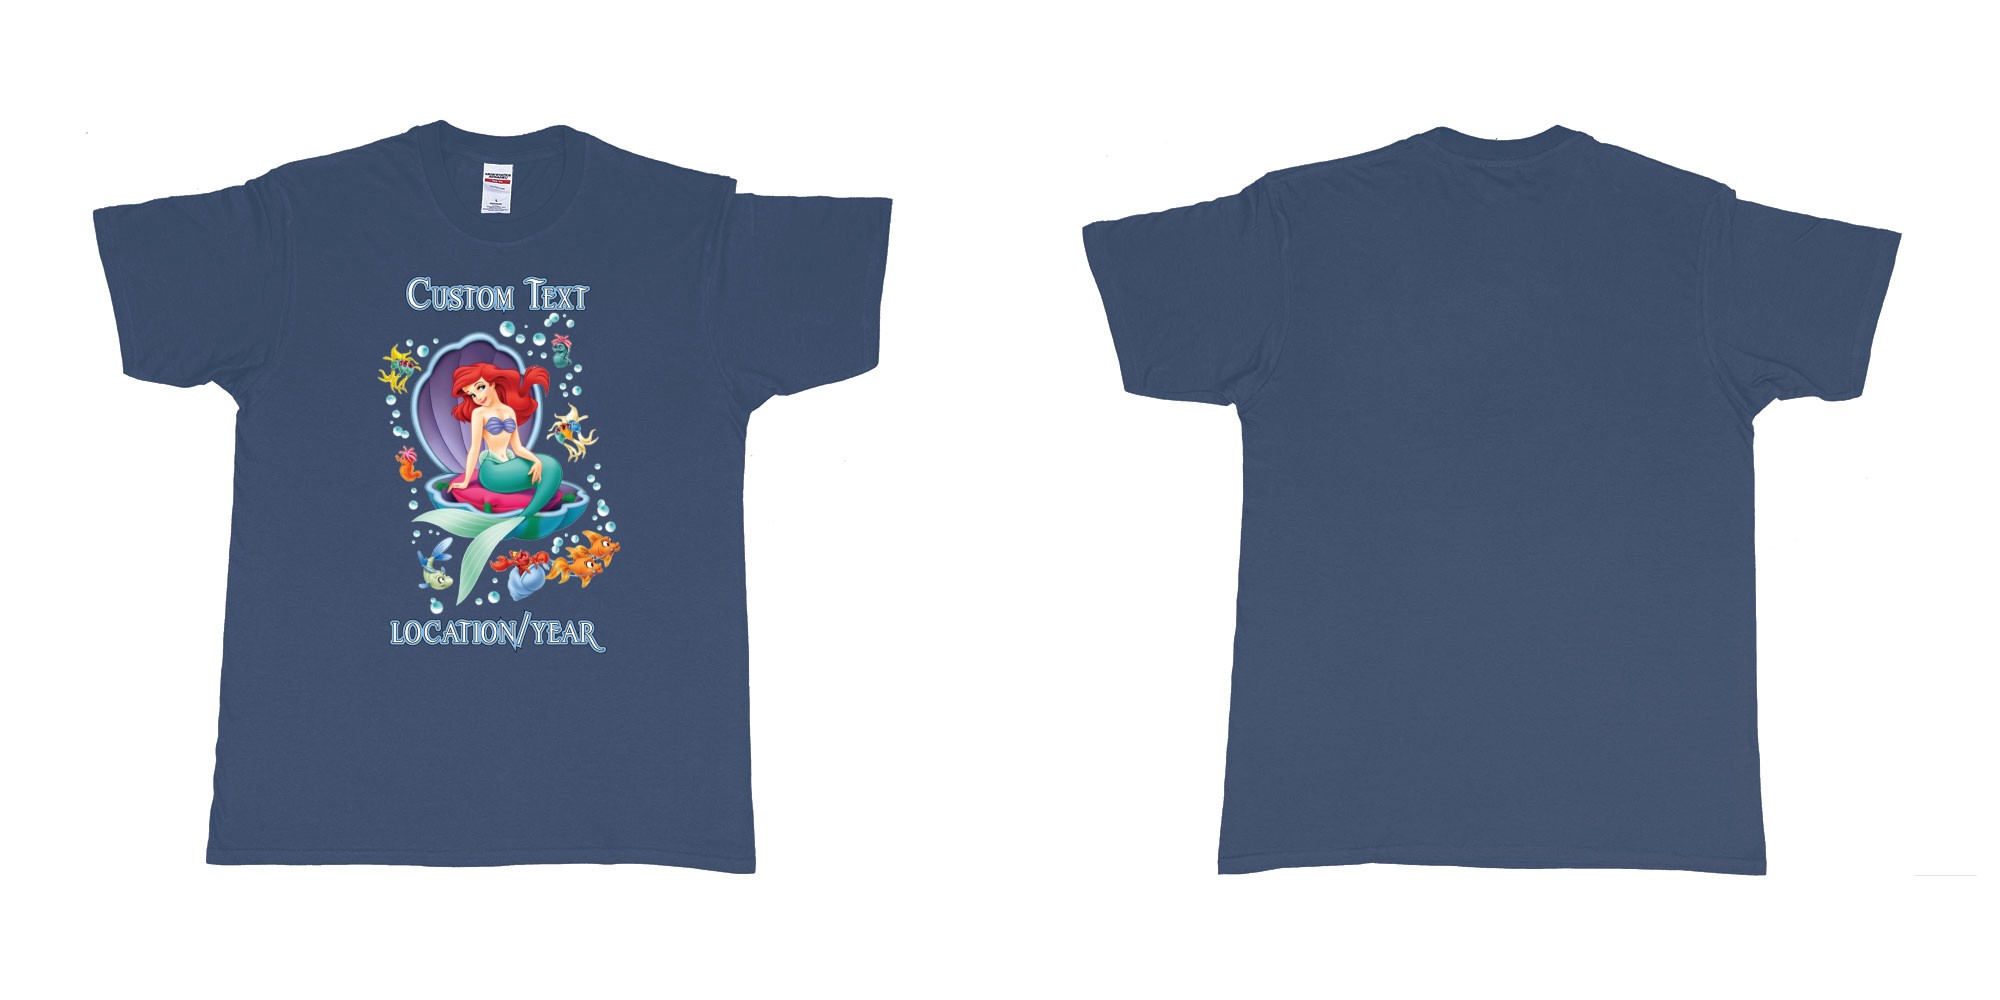 Custom tshirt design little mermaid shell birthday in fabric color navy choice your own text made in Bali by The Pirate Way